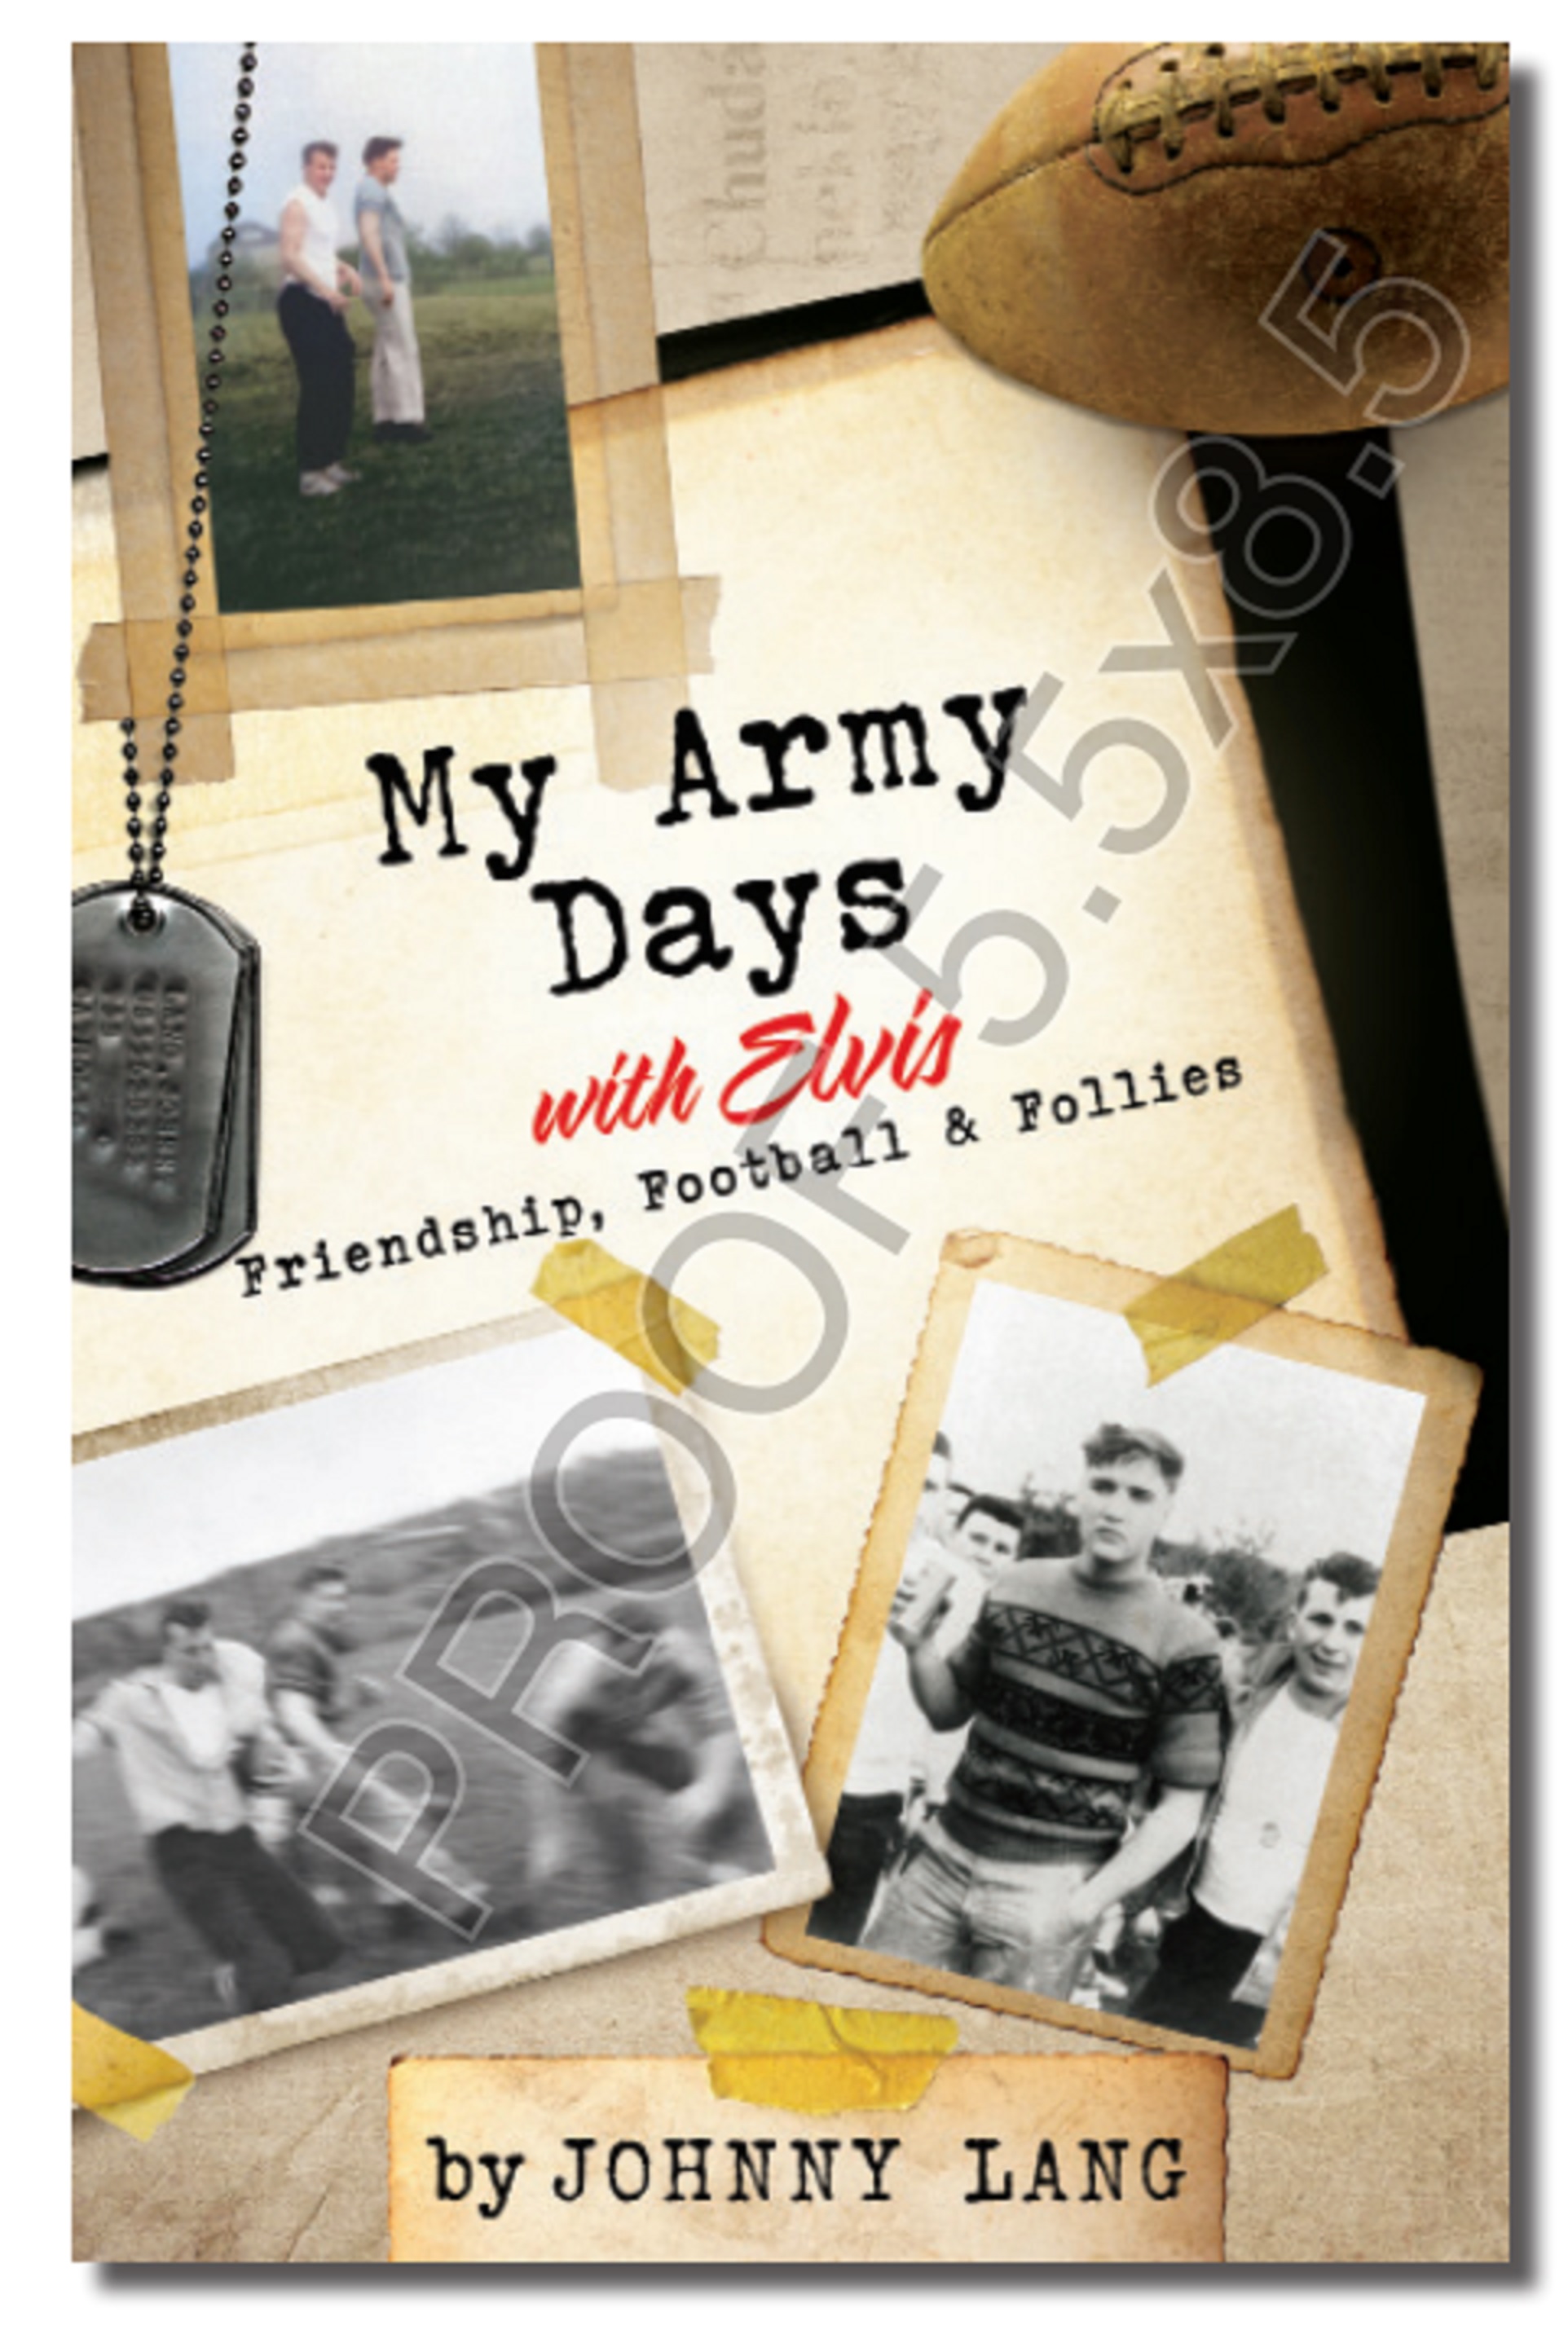 NEW BOOK RELEASE, “MY ARMY DAYS WITH ELVIS,” OFFERS UNIQUE MEMORIES OF THE YOUNG KING OF ROCK & ROLL